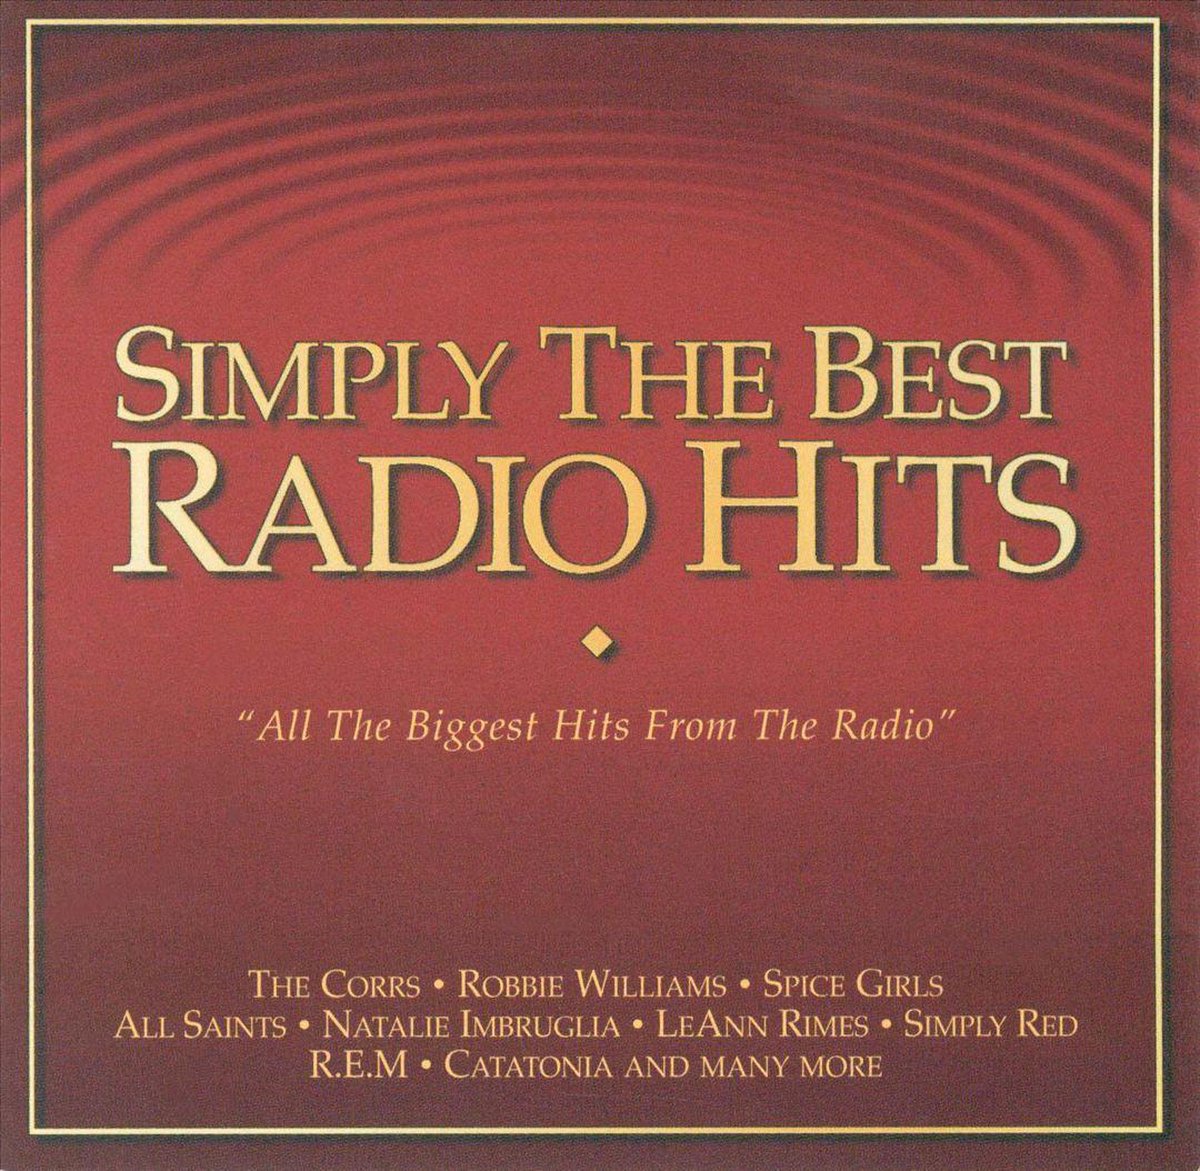 Simply The Best Radio Hits - various artists